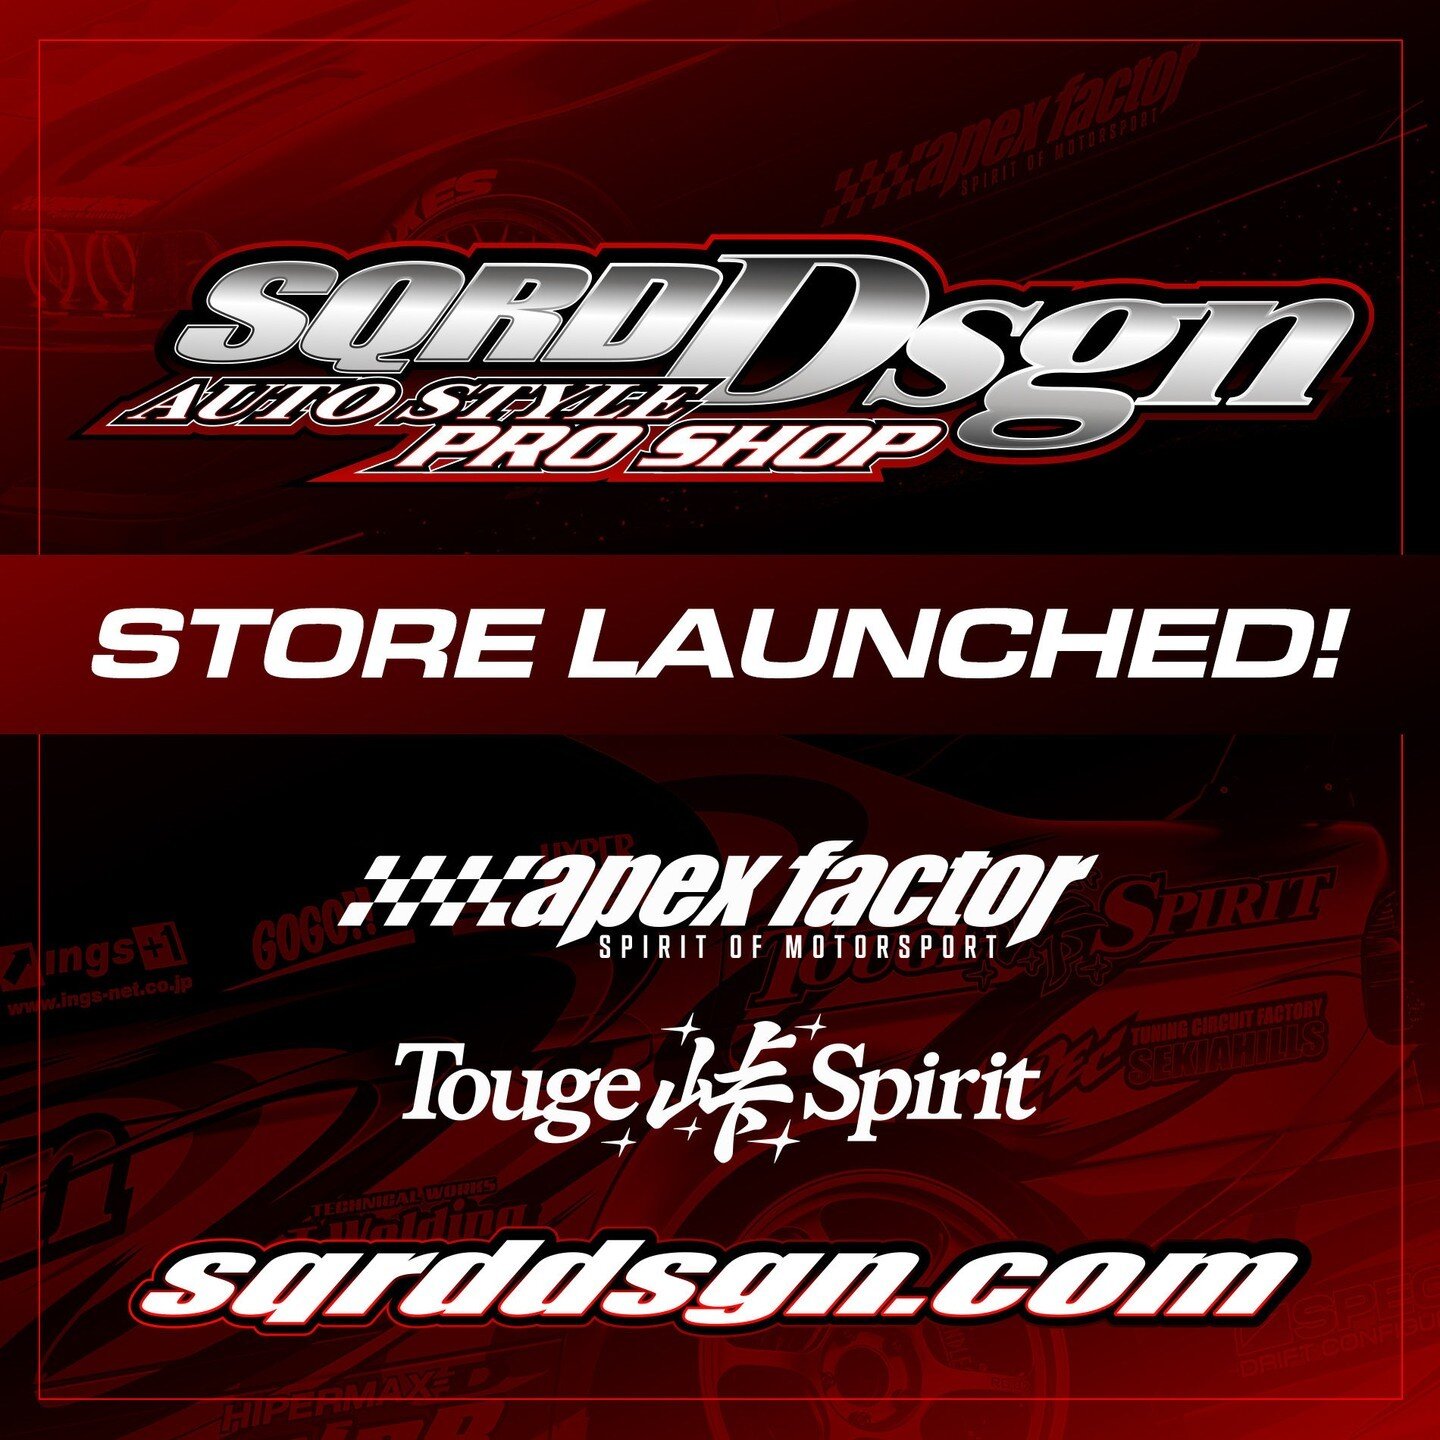 After wanting to do this for YEARS, but always listened more to the inner voice that said &quot;It will never work.&quot;, I have finally launched my store. Sure, maybe launching in September isn't the best idea, but can't postpone this any more now.